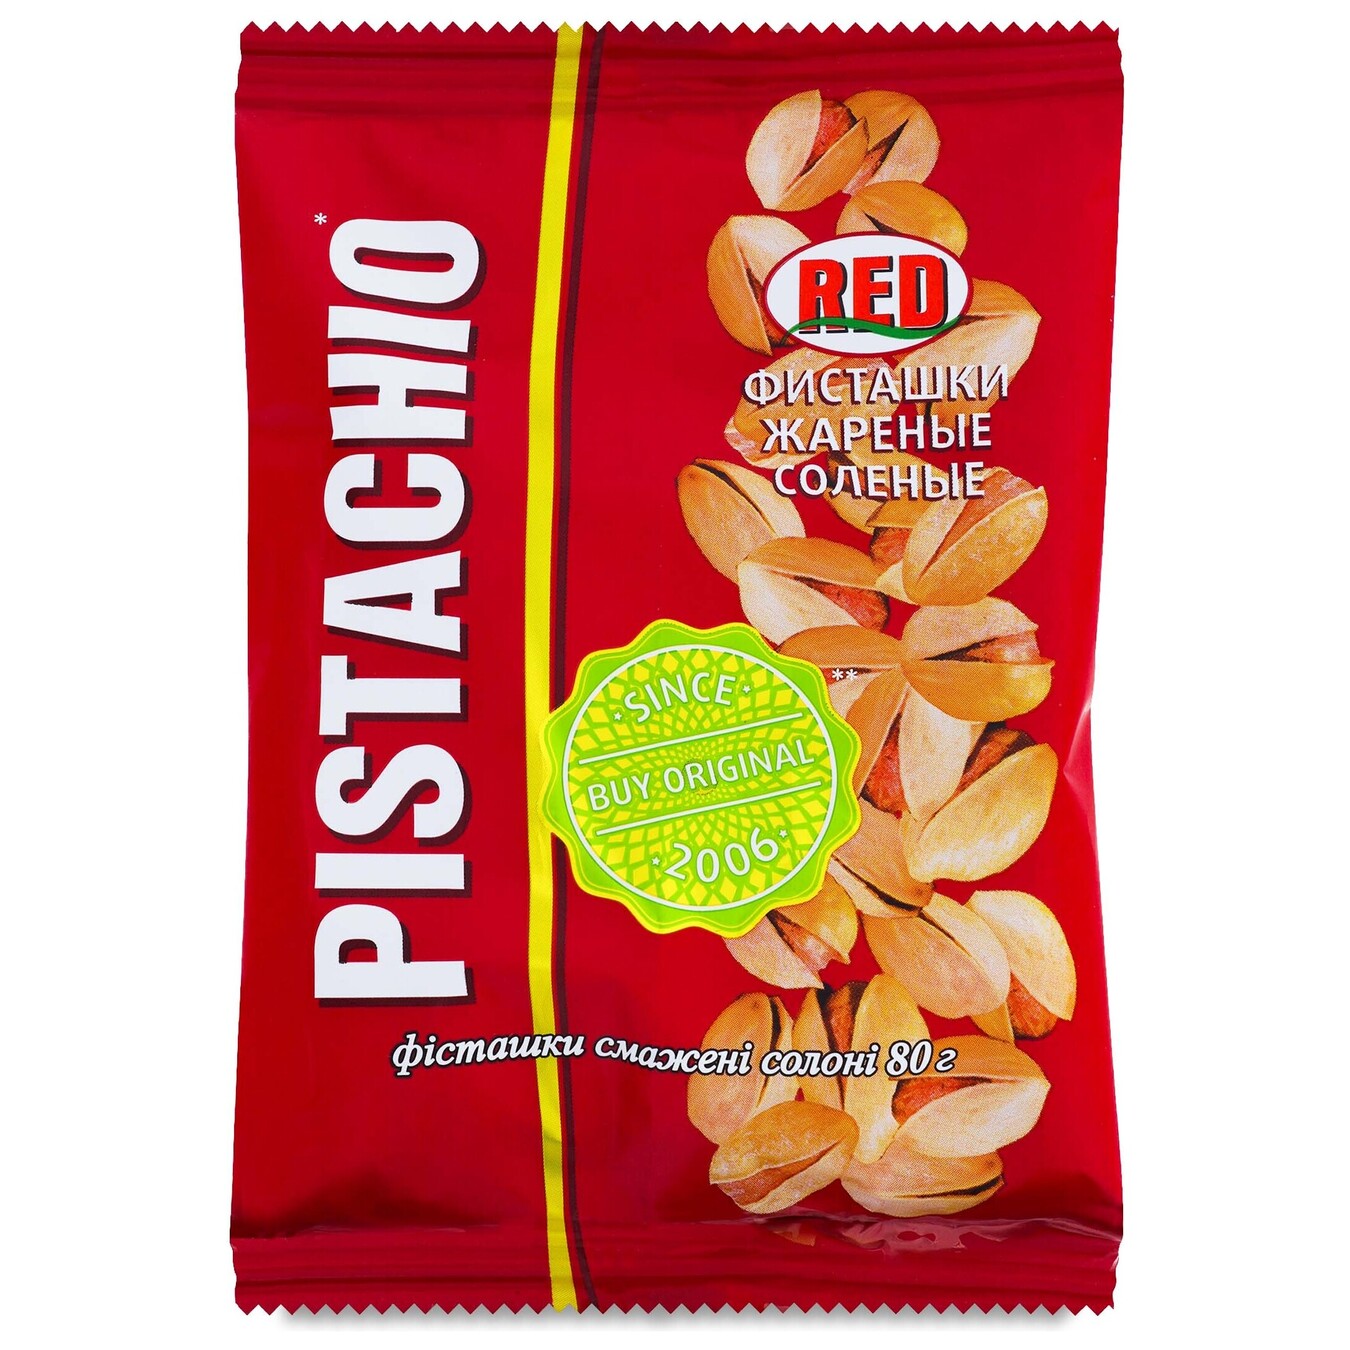 Red roasted salted pistachio 80g